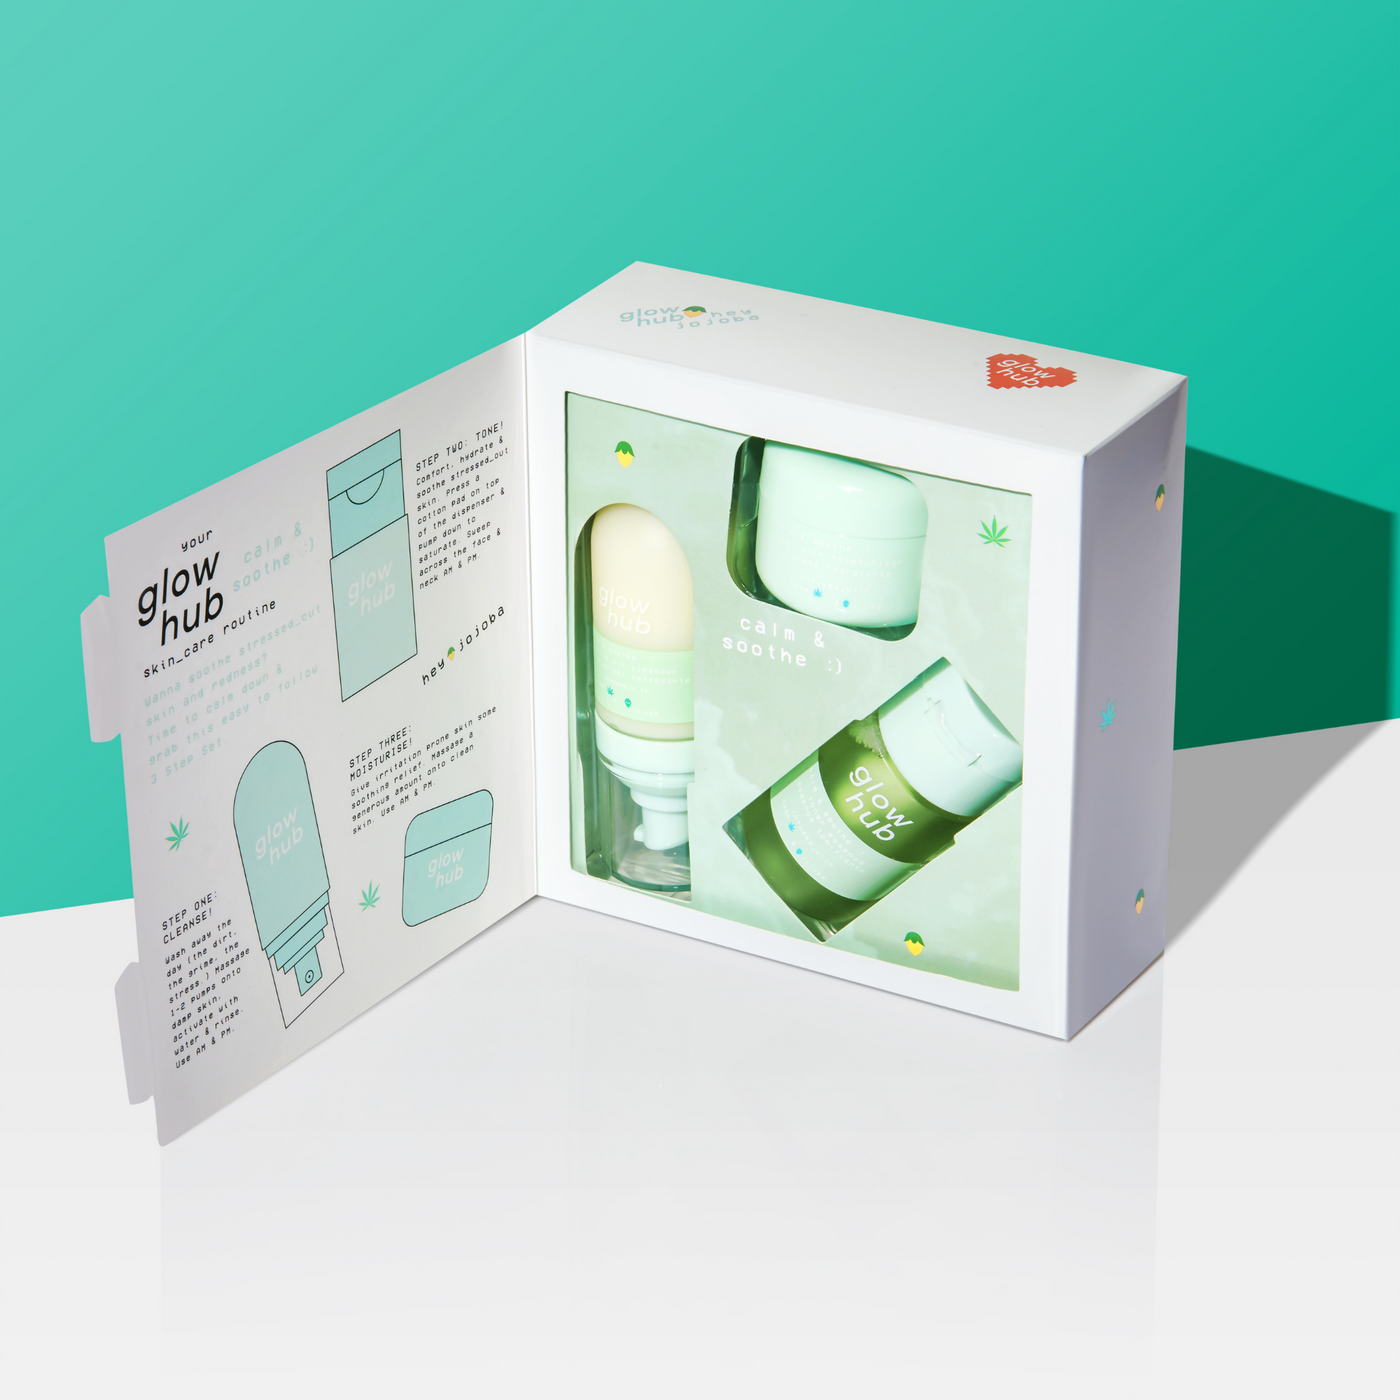 Glow Hub - Calm & Soothe Discovery Gift Set